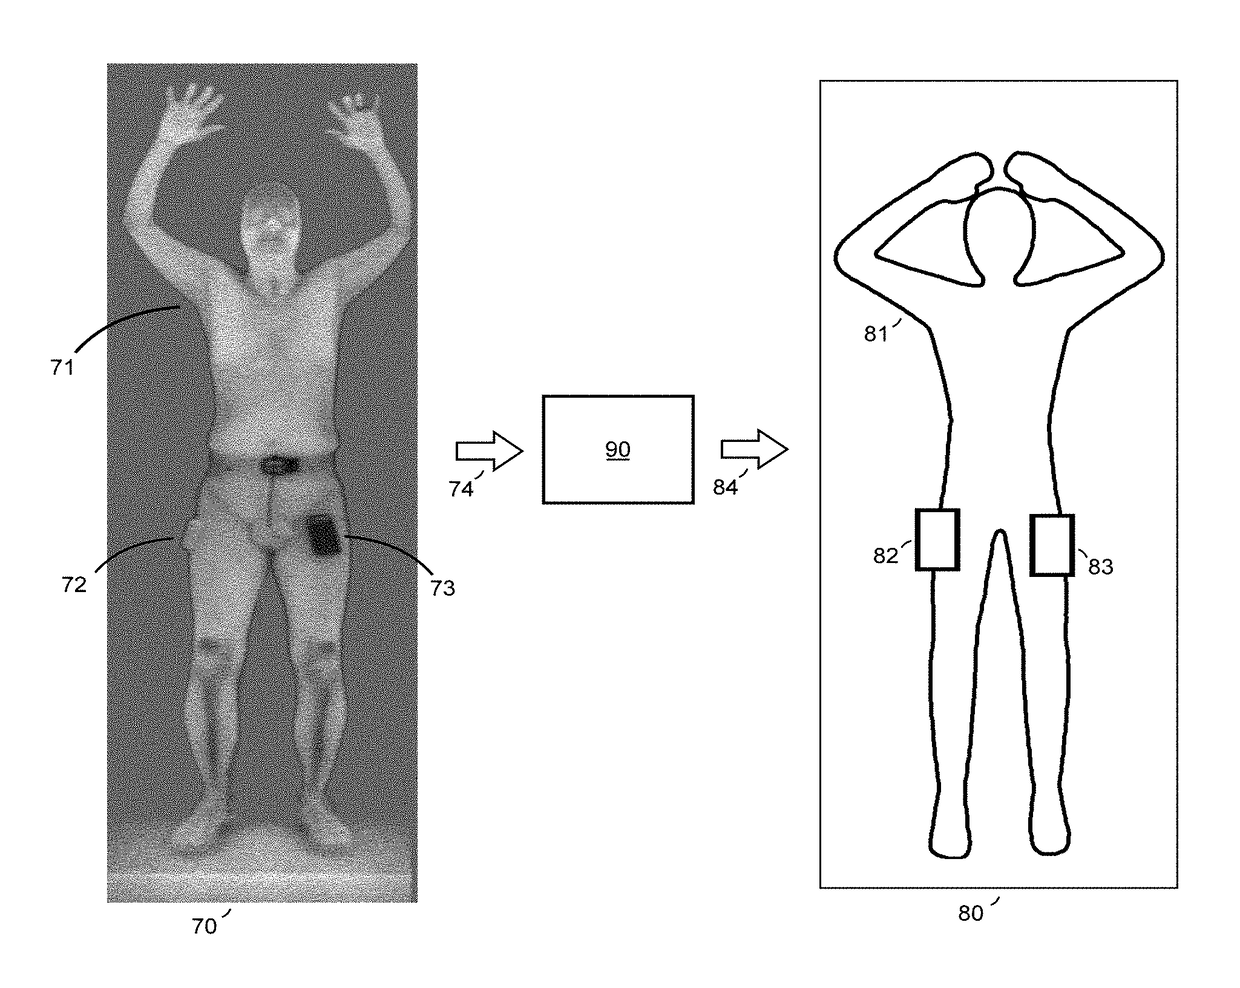 Body Scanner with Automated Target Recognition